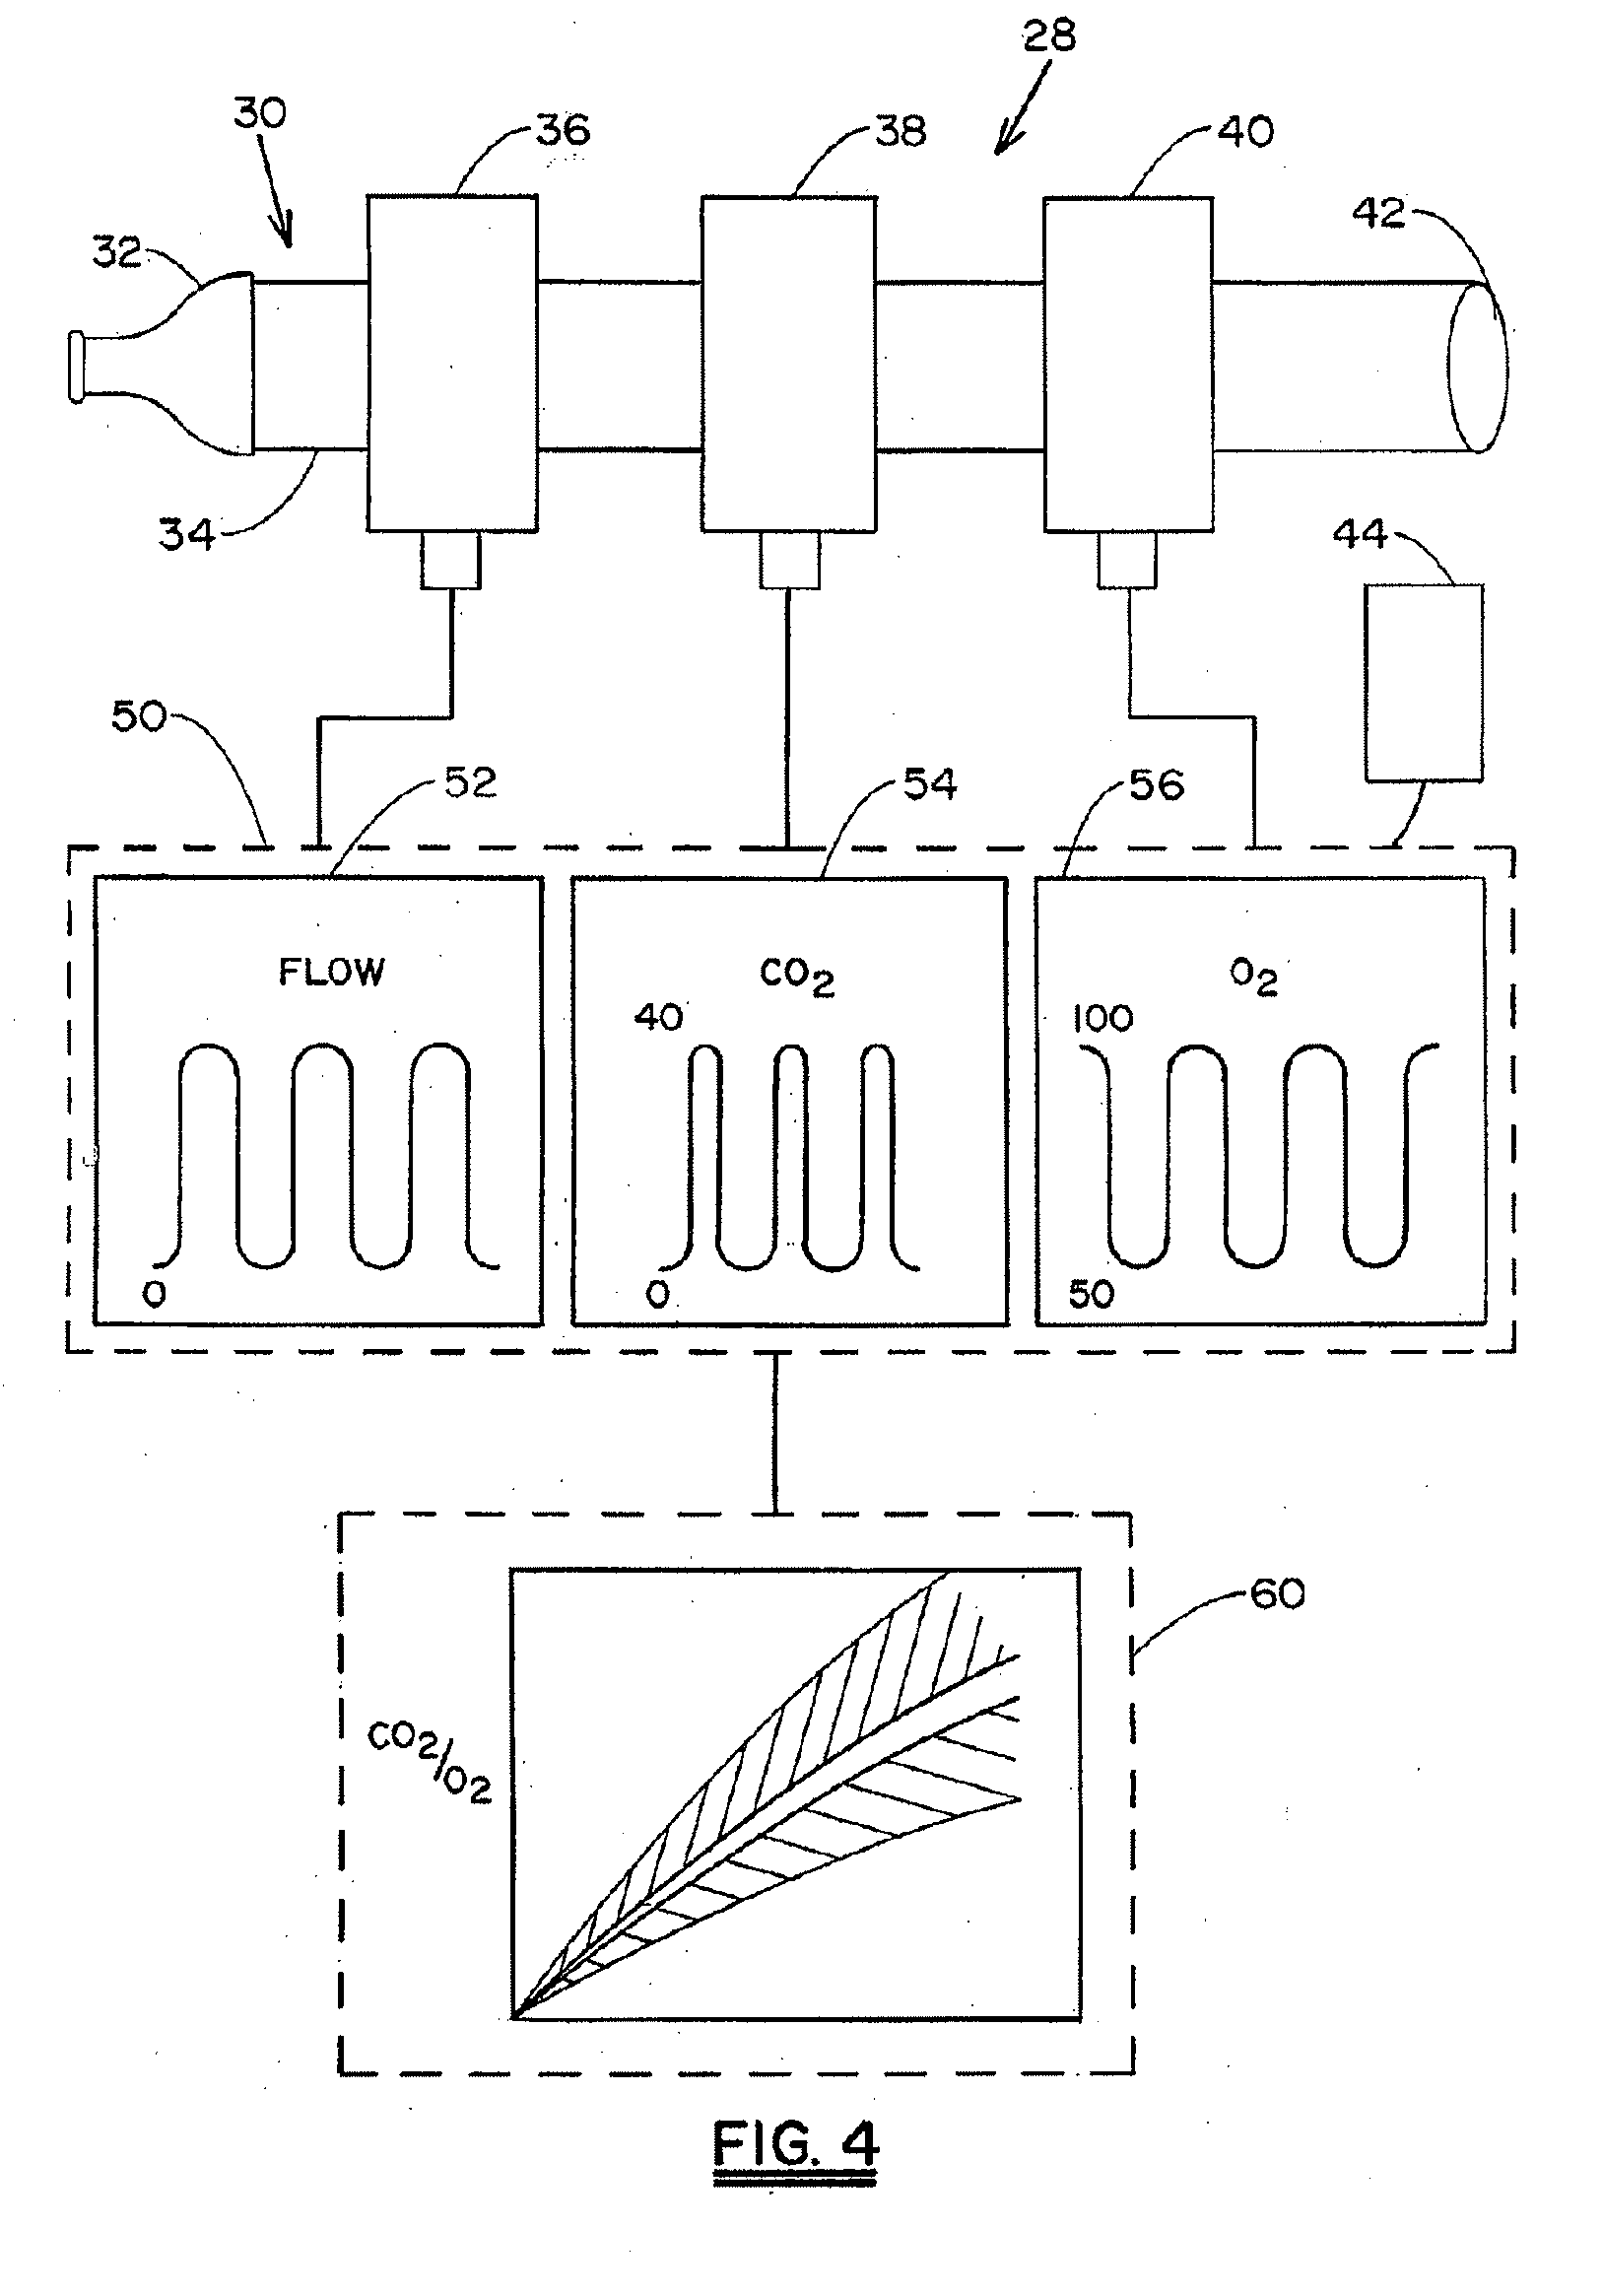 Method and System for Diagnosing Post-Surgical Pulmonary Vascular Occlusions